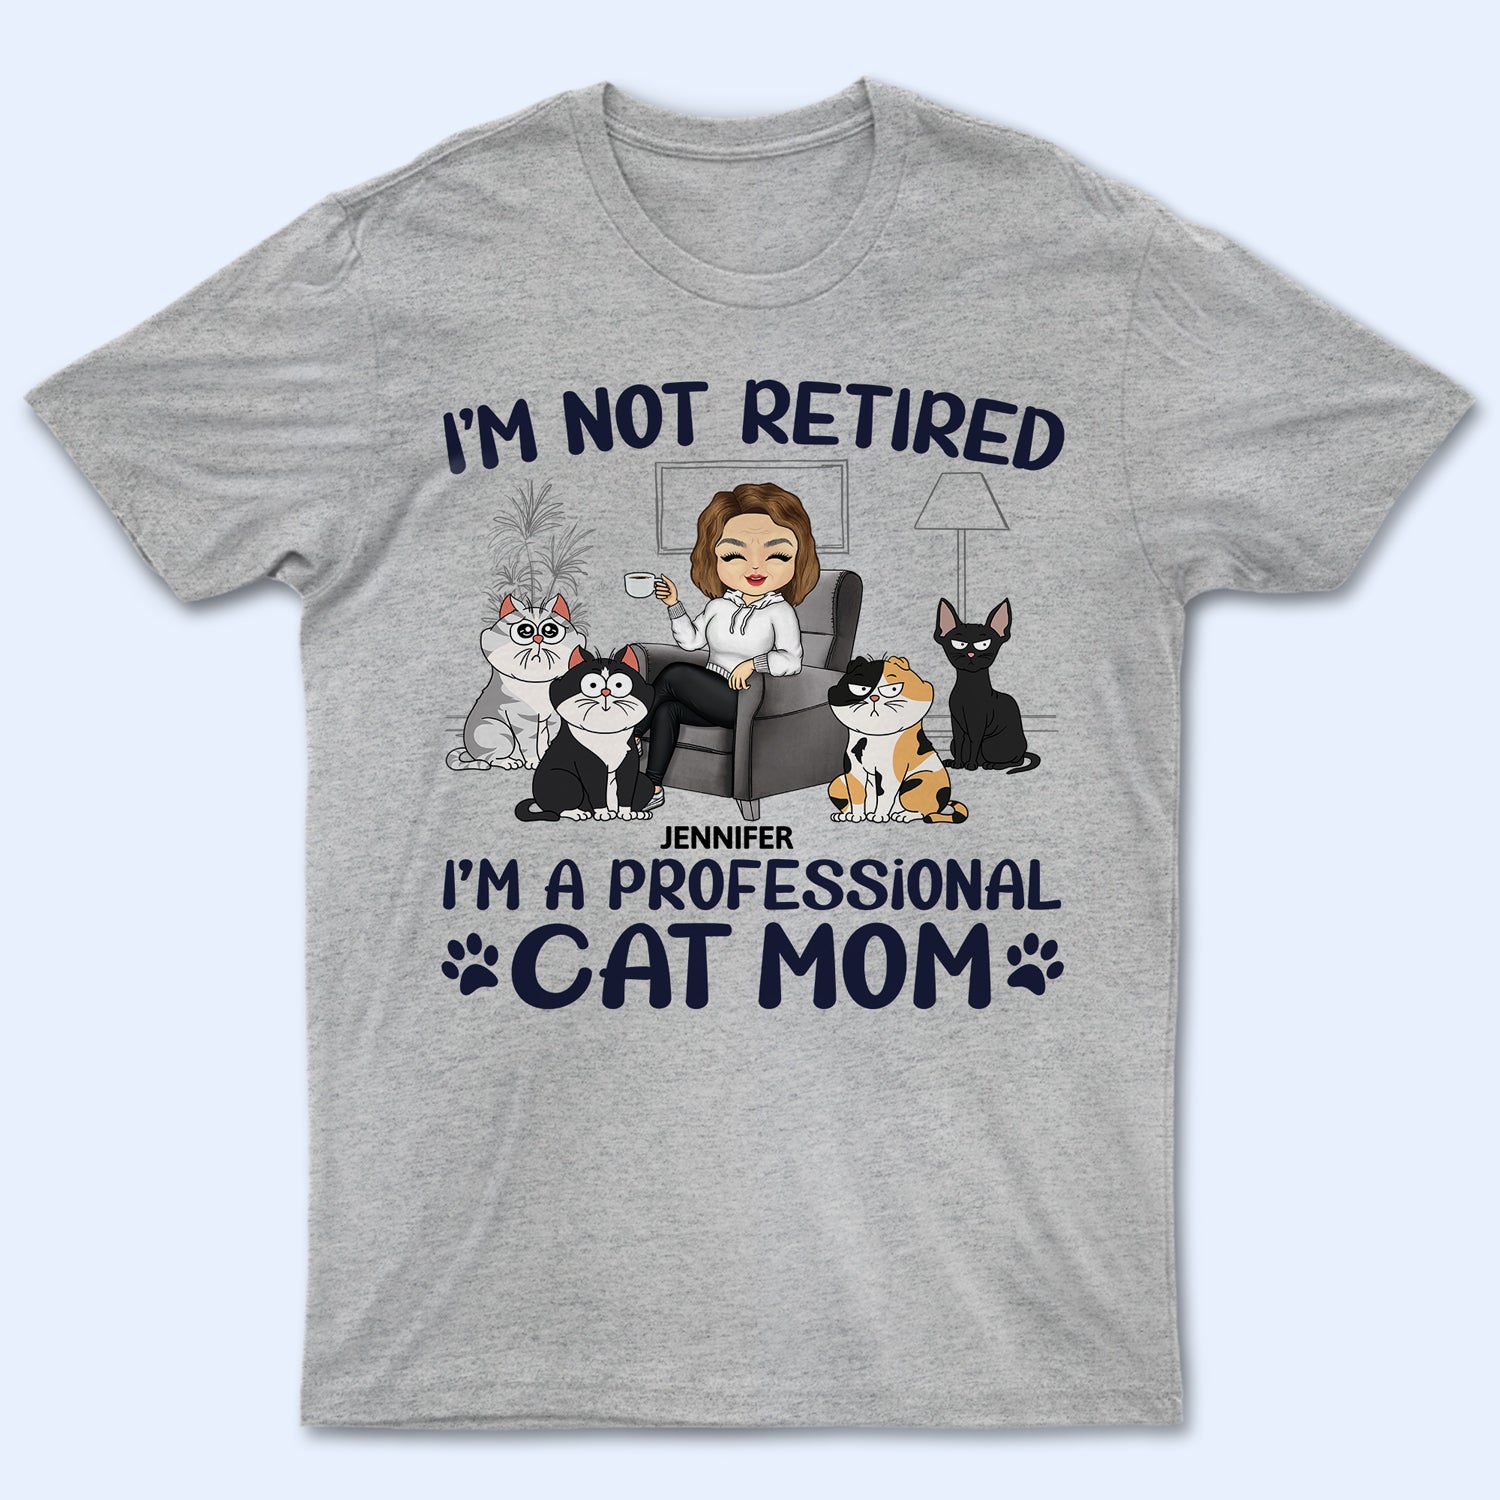 I'm A Professional Cat Mom - Funny, Retirement Gift For Cat Mom, Grandma - Personalized T Shirt